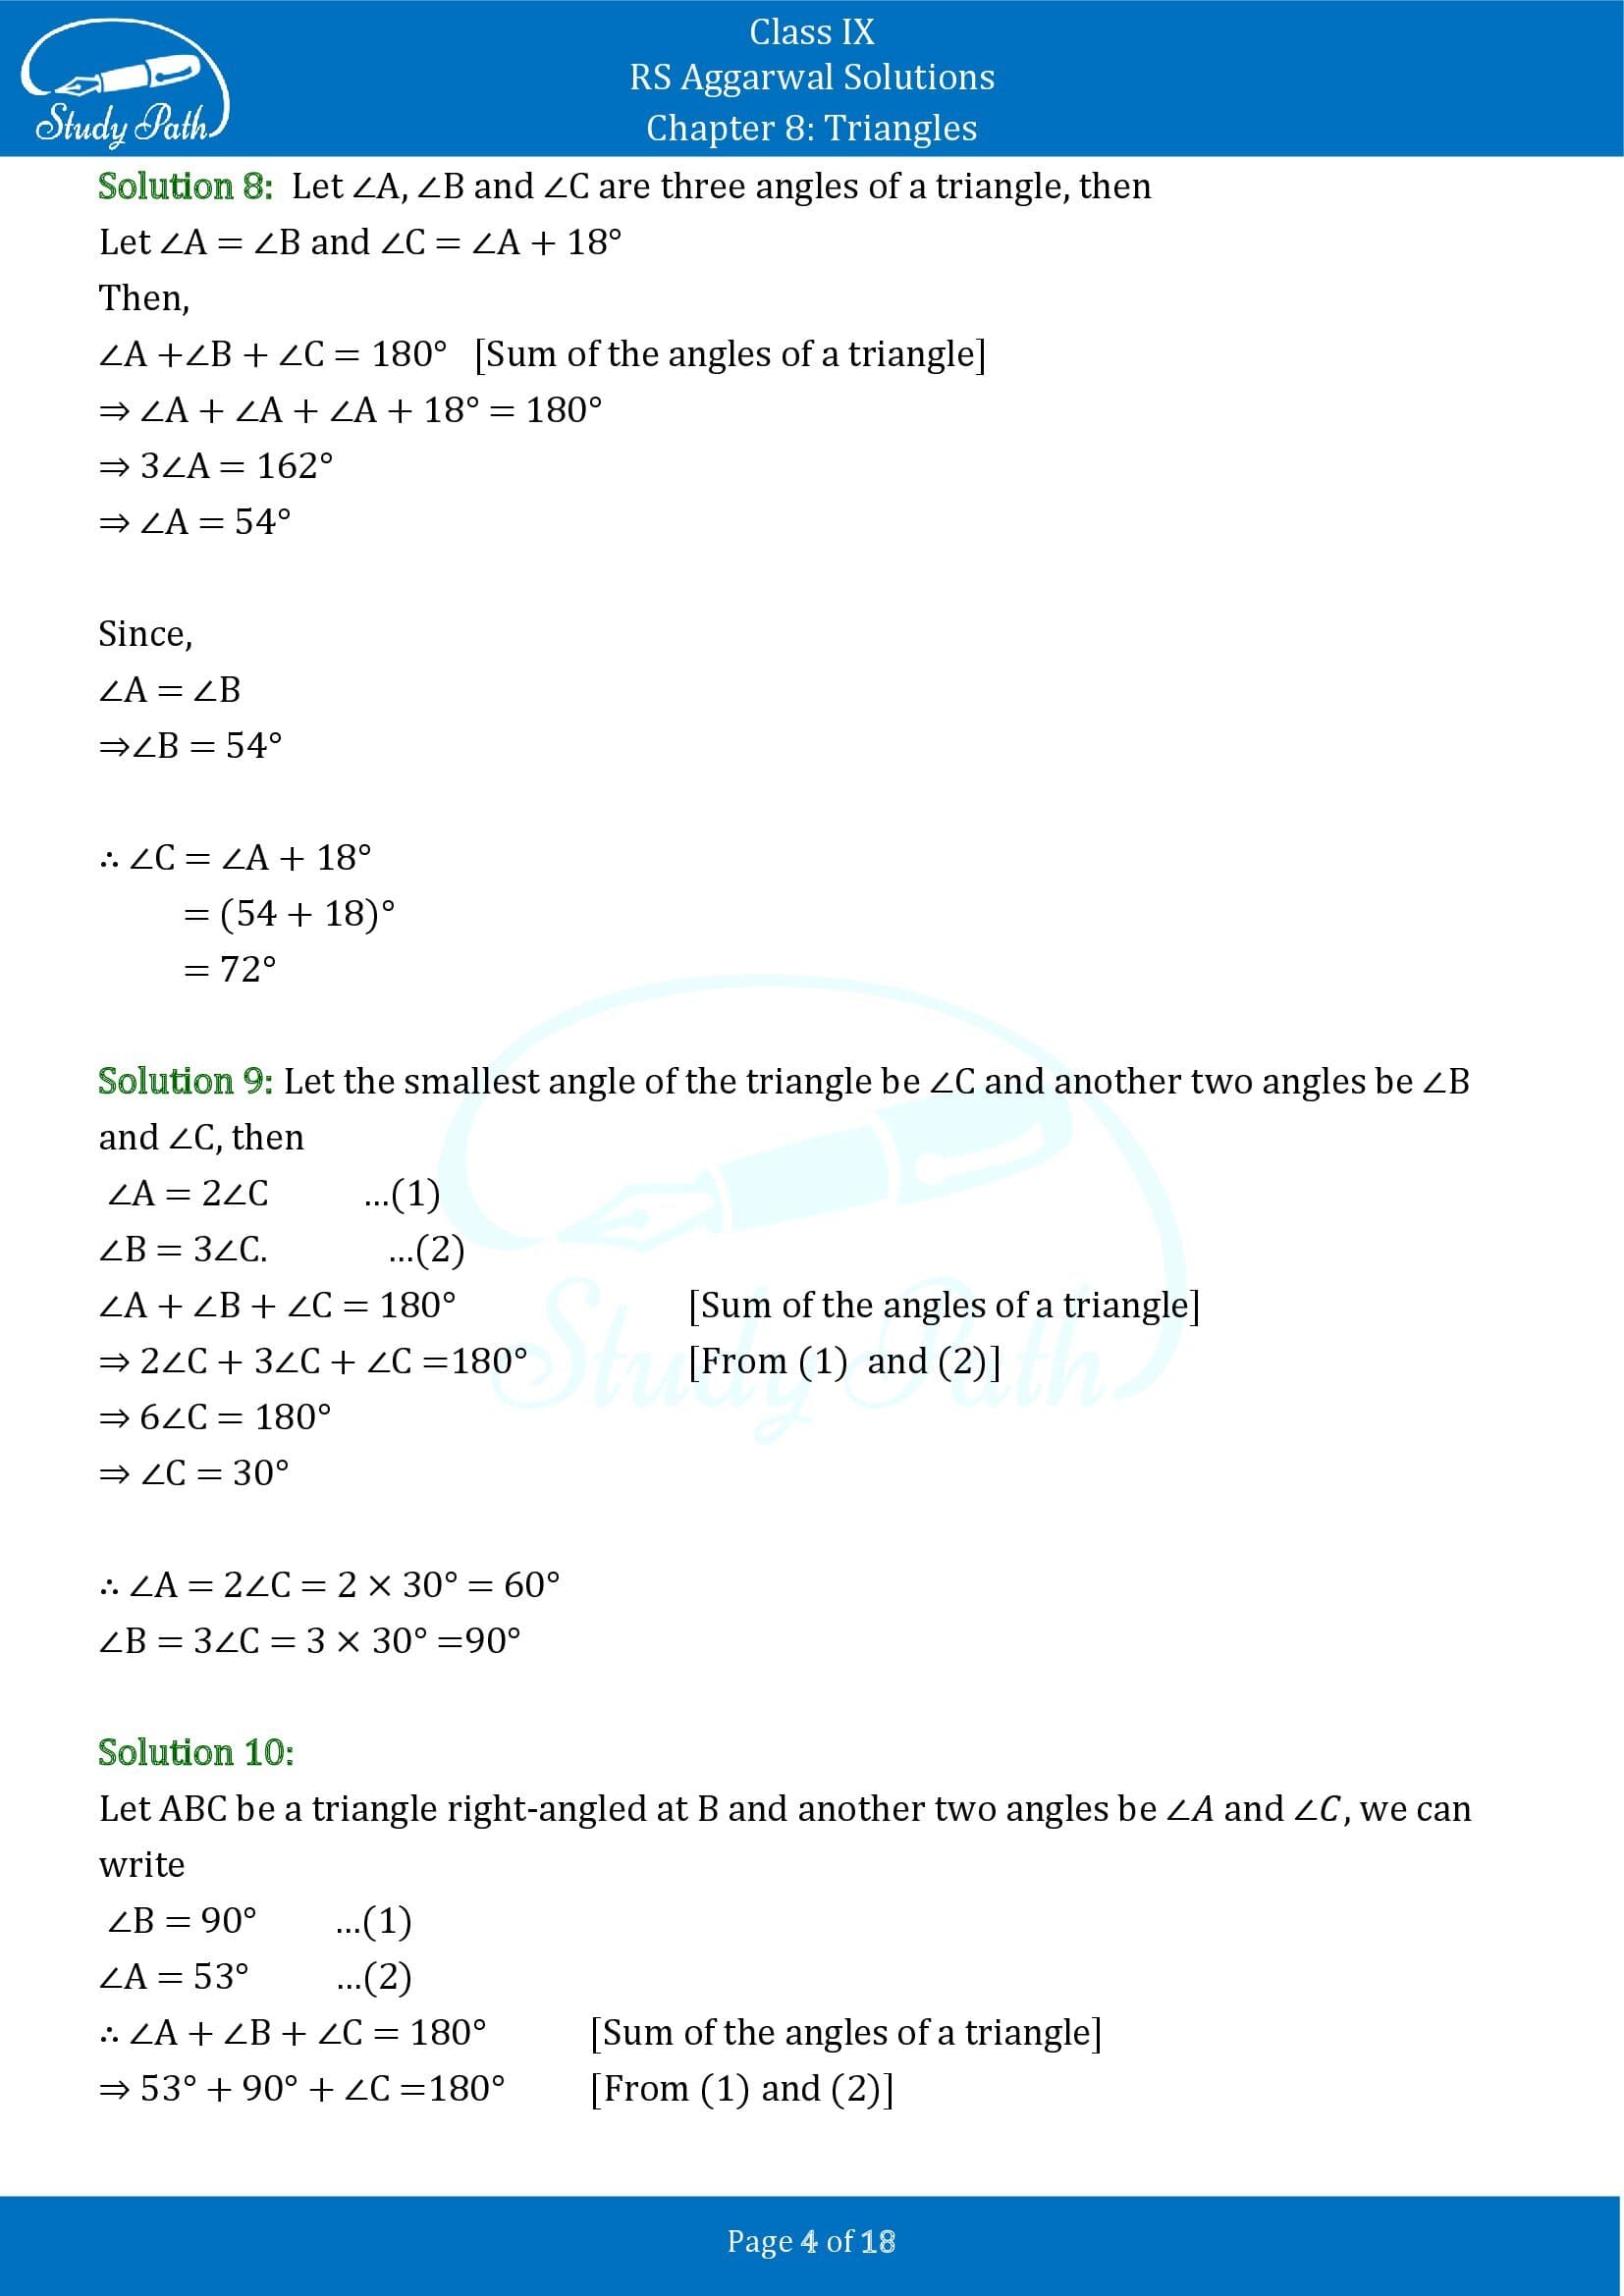 RS Aggarwal Solutions Class 9 Chapter 8 Triangles Exercise 8 0004